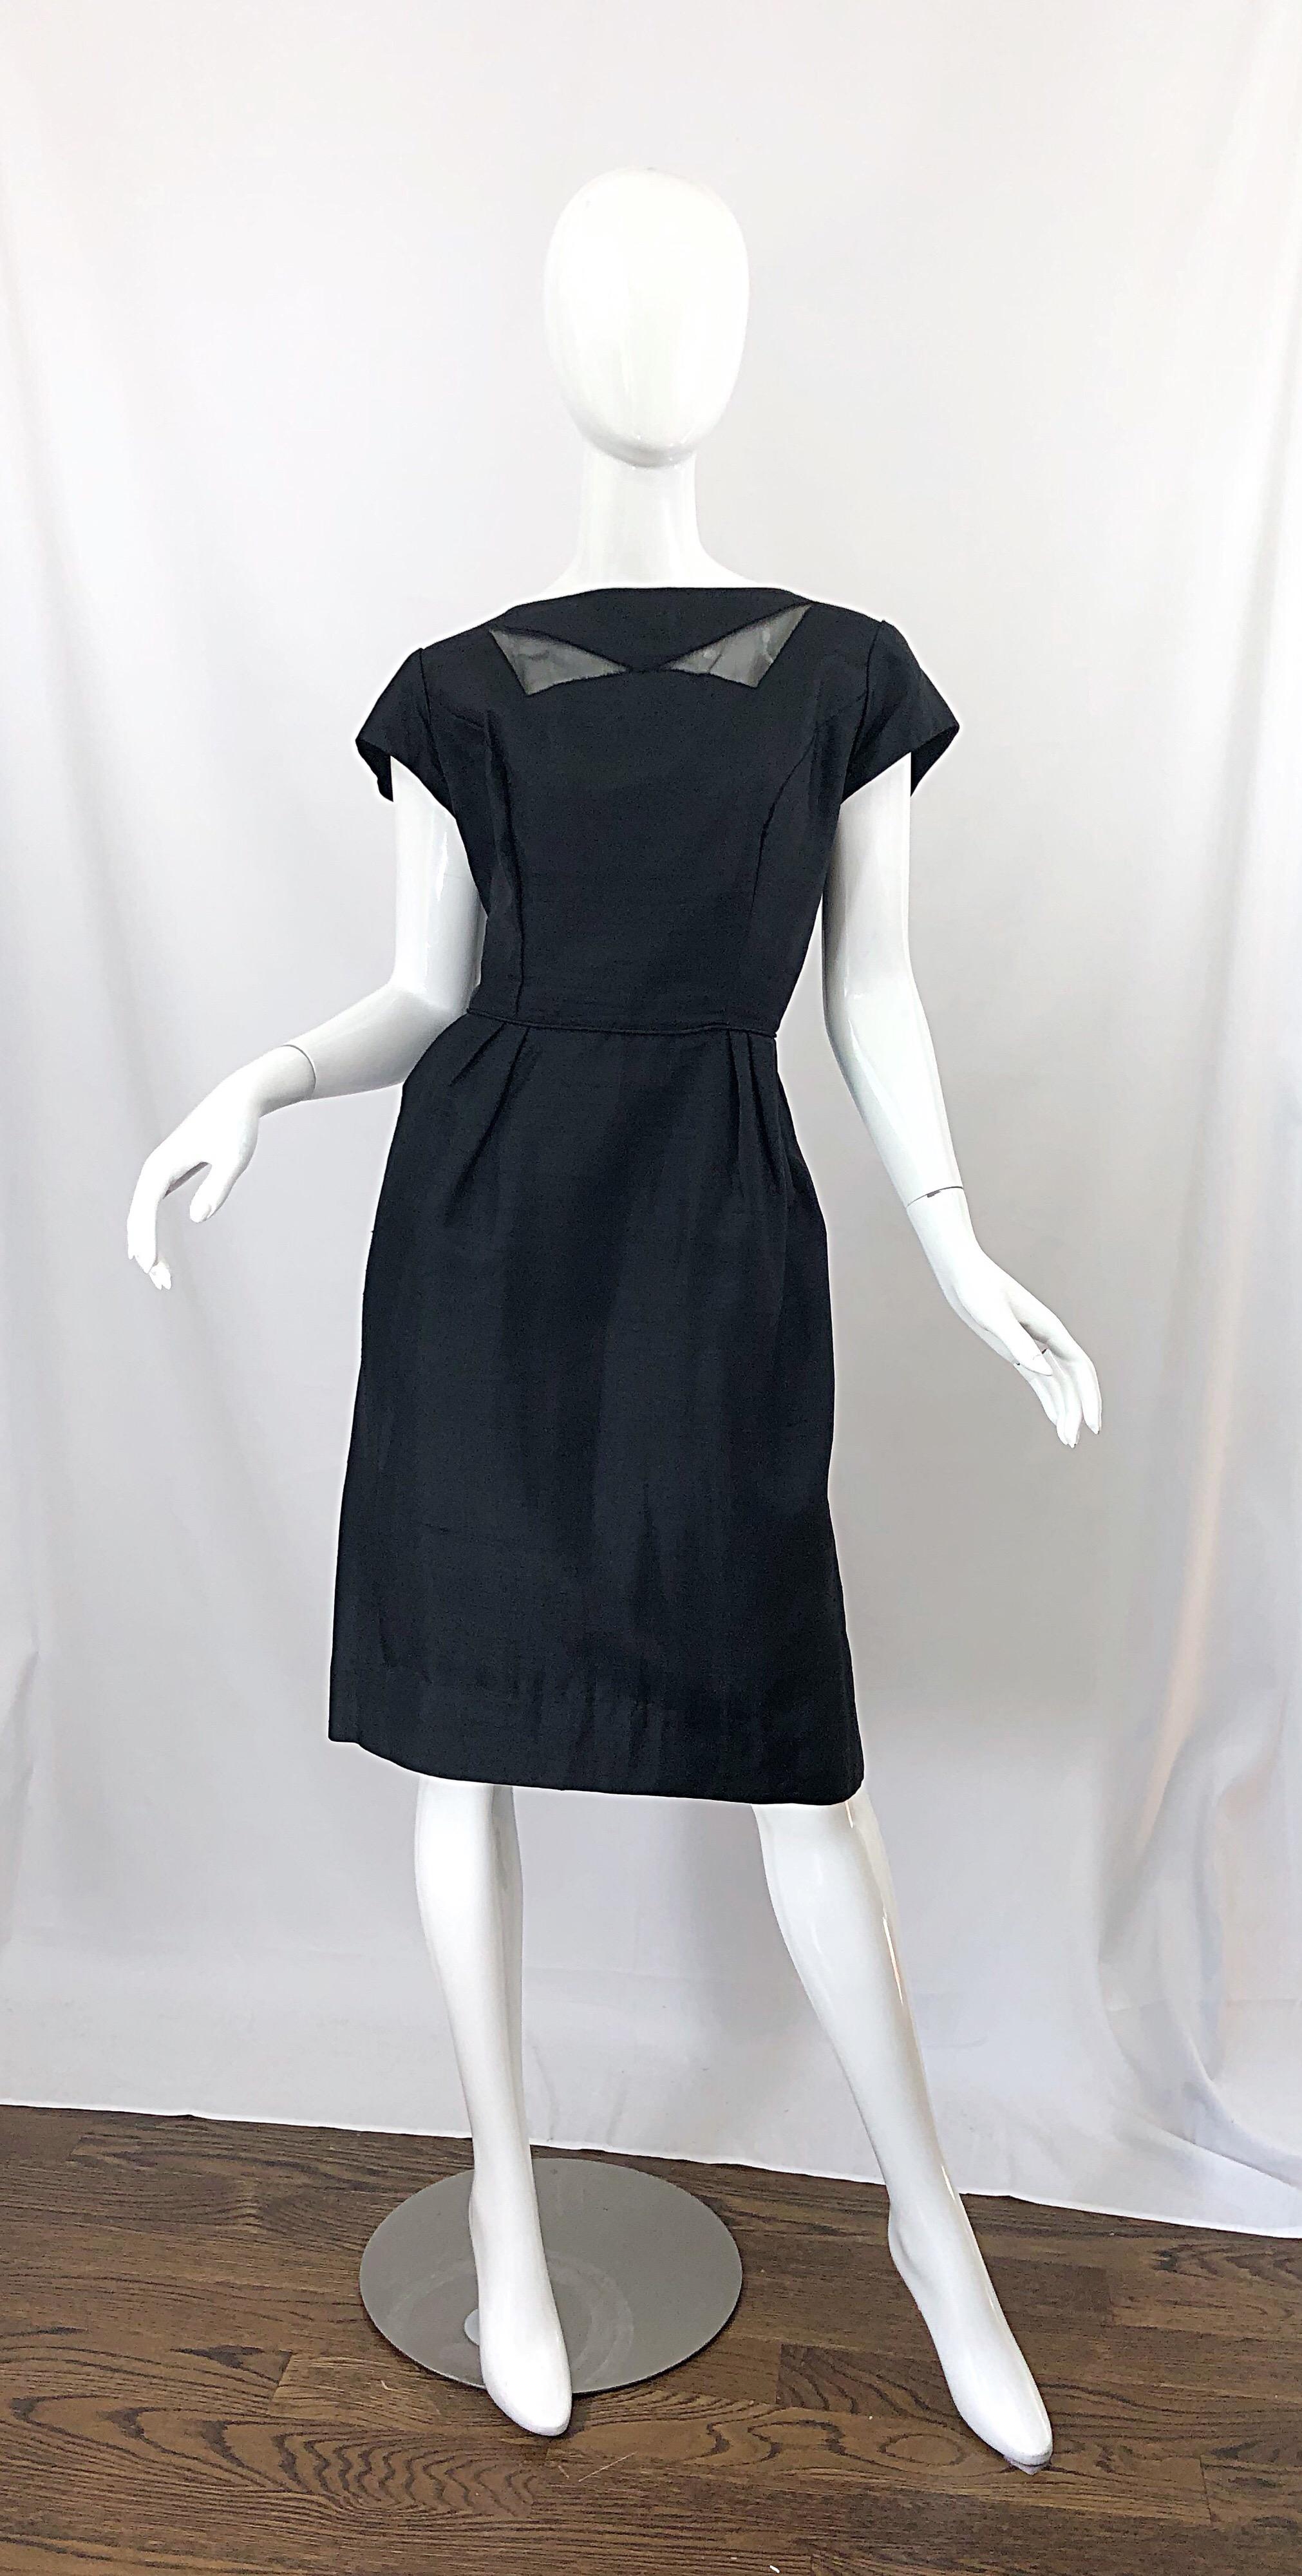 Chic 1950s demi couture black silk cut-out cocktail dress! Features a fitted bodice and forgiving skirt. Low cut back features a large bow that snaps on one side. Full metal zipper up the back with hook-and-eye closure. Cut outs at the top neck